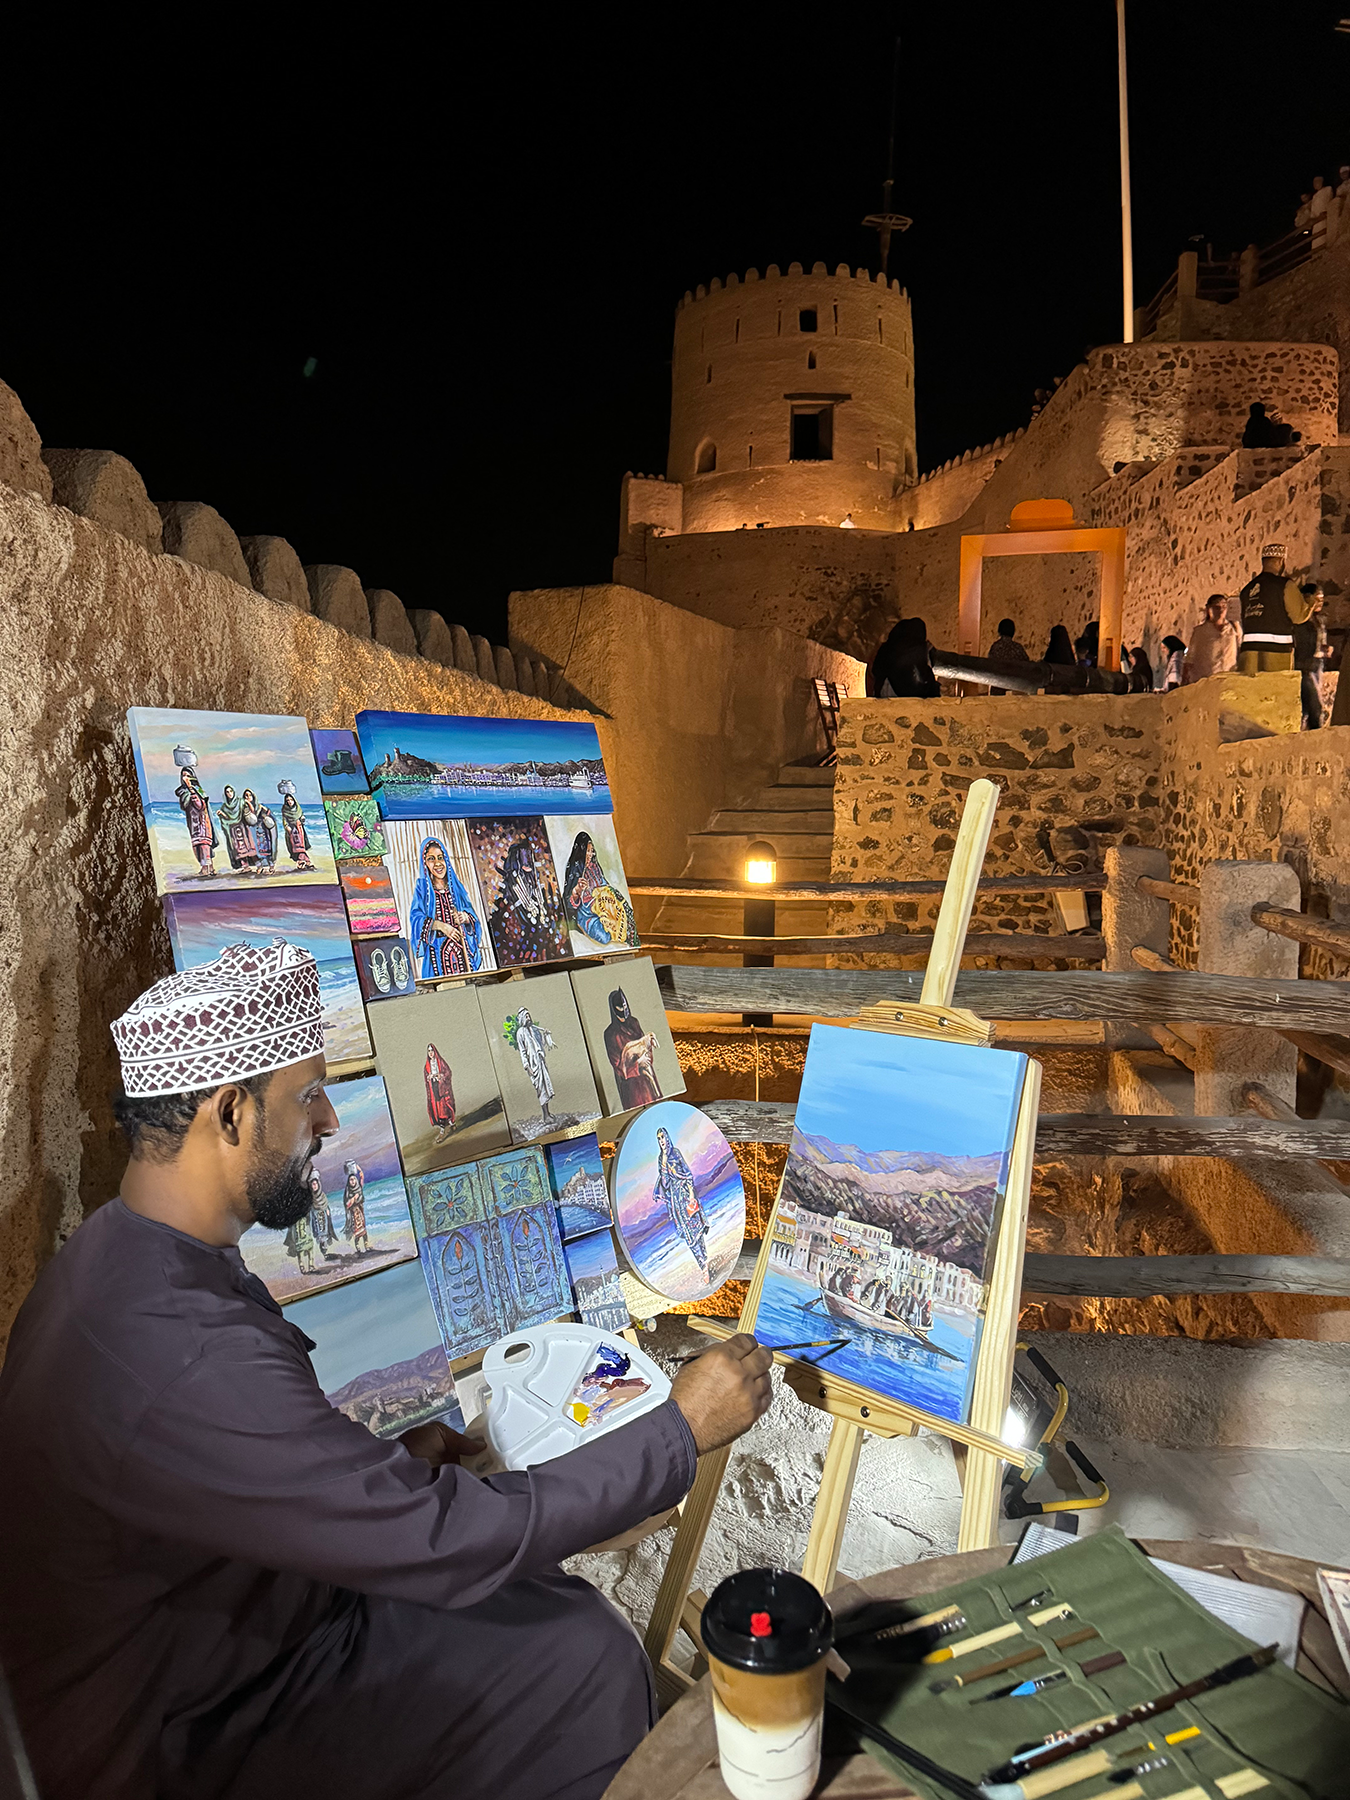 From the _ Art Souq_ event held at Muttrah Fort. Photo courtesy of Muttrah Fort LLC (1)